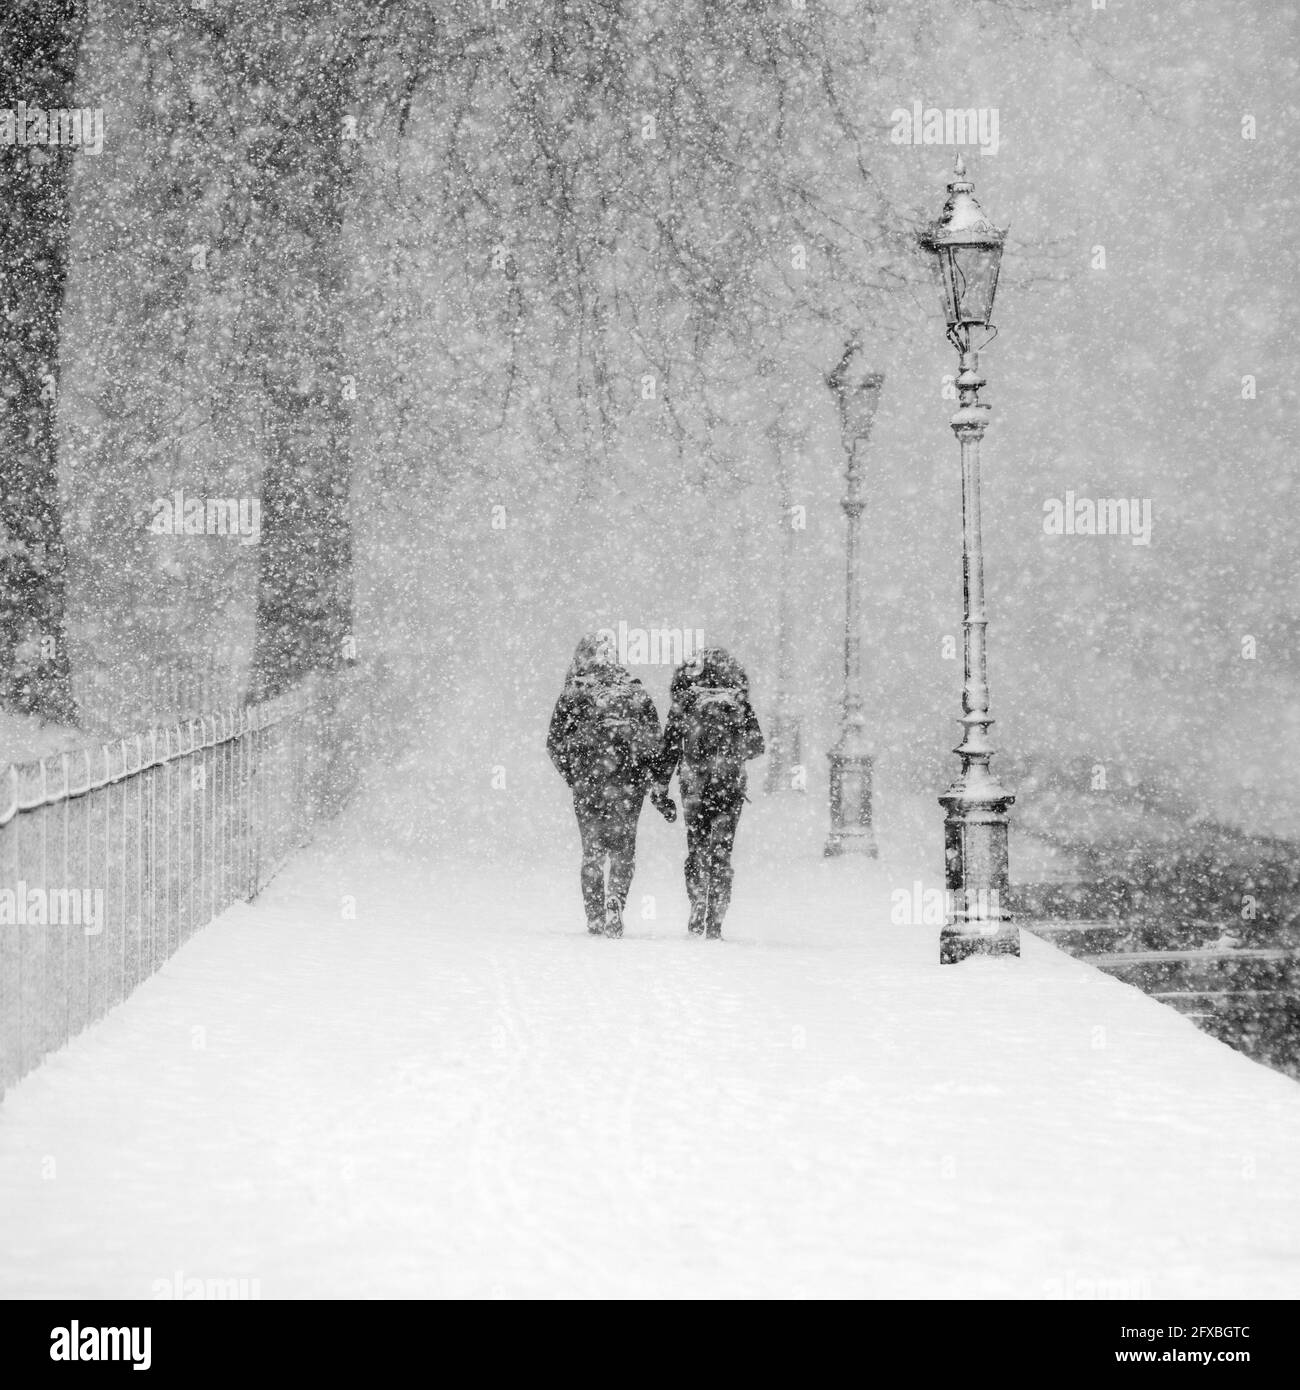 Couple walking together in snow-covered park during heavy snowfall Stock Photo